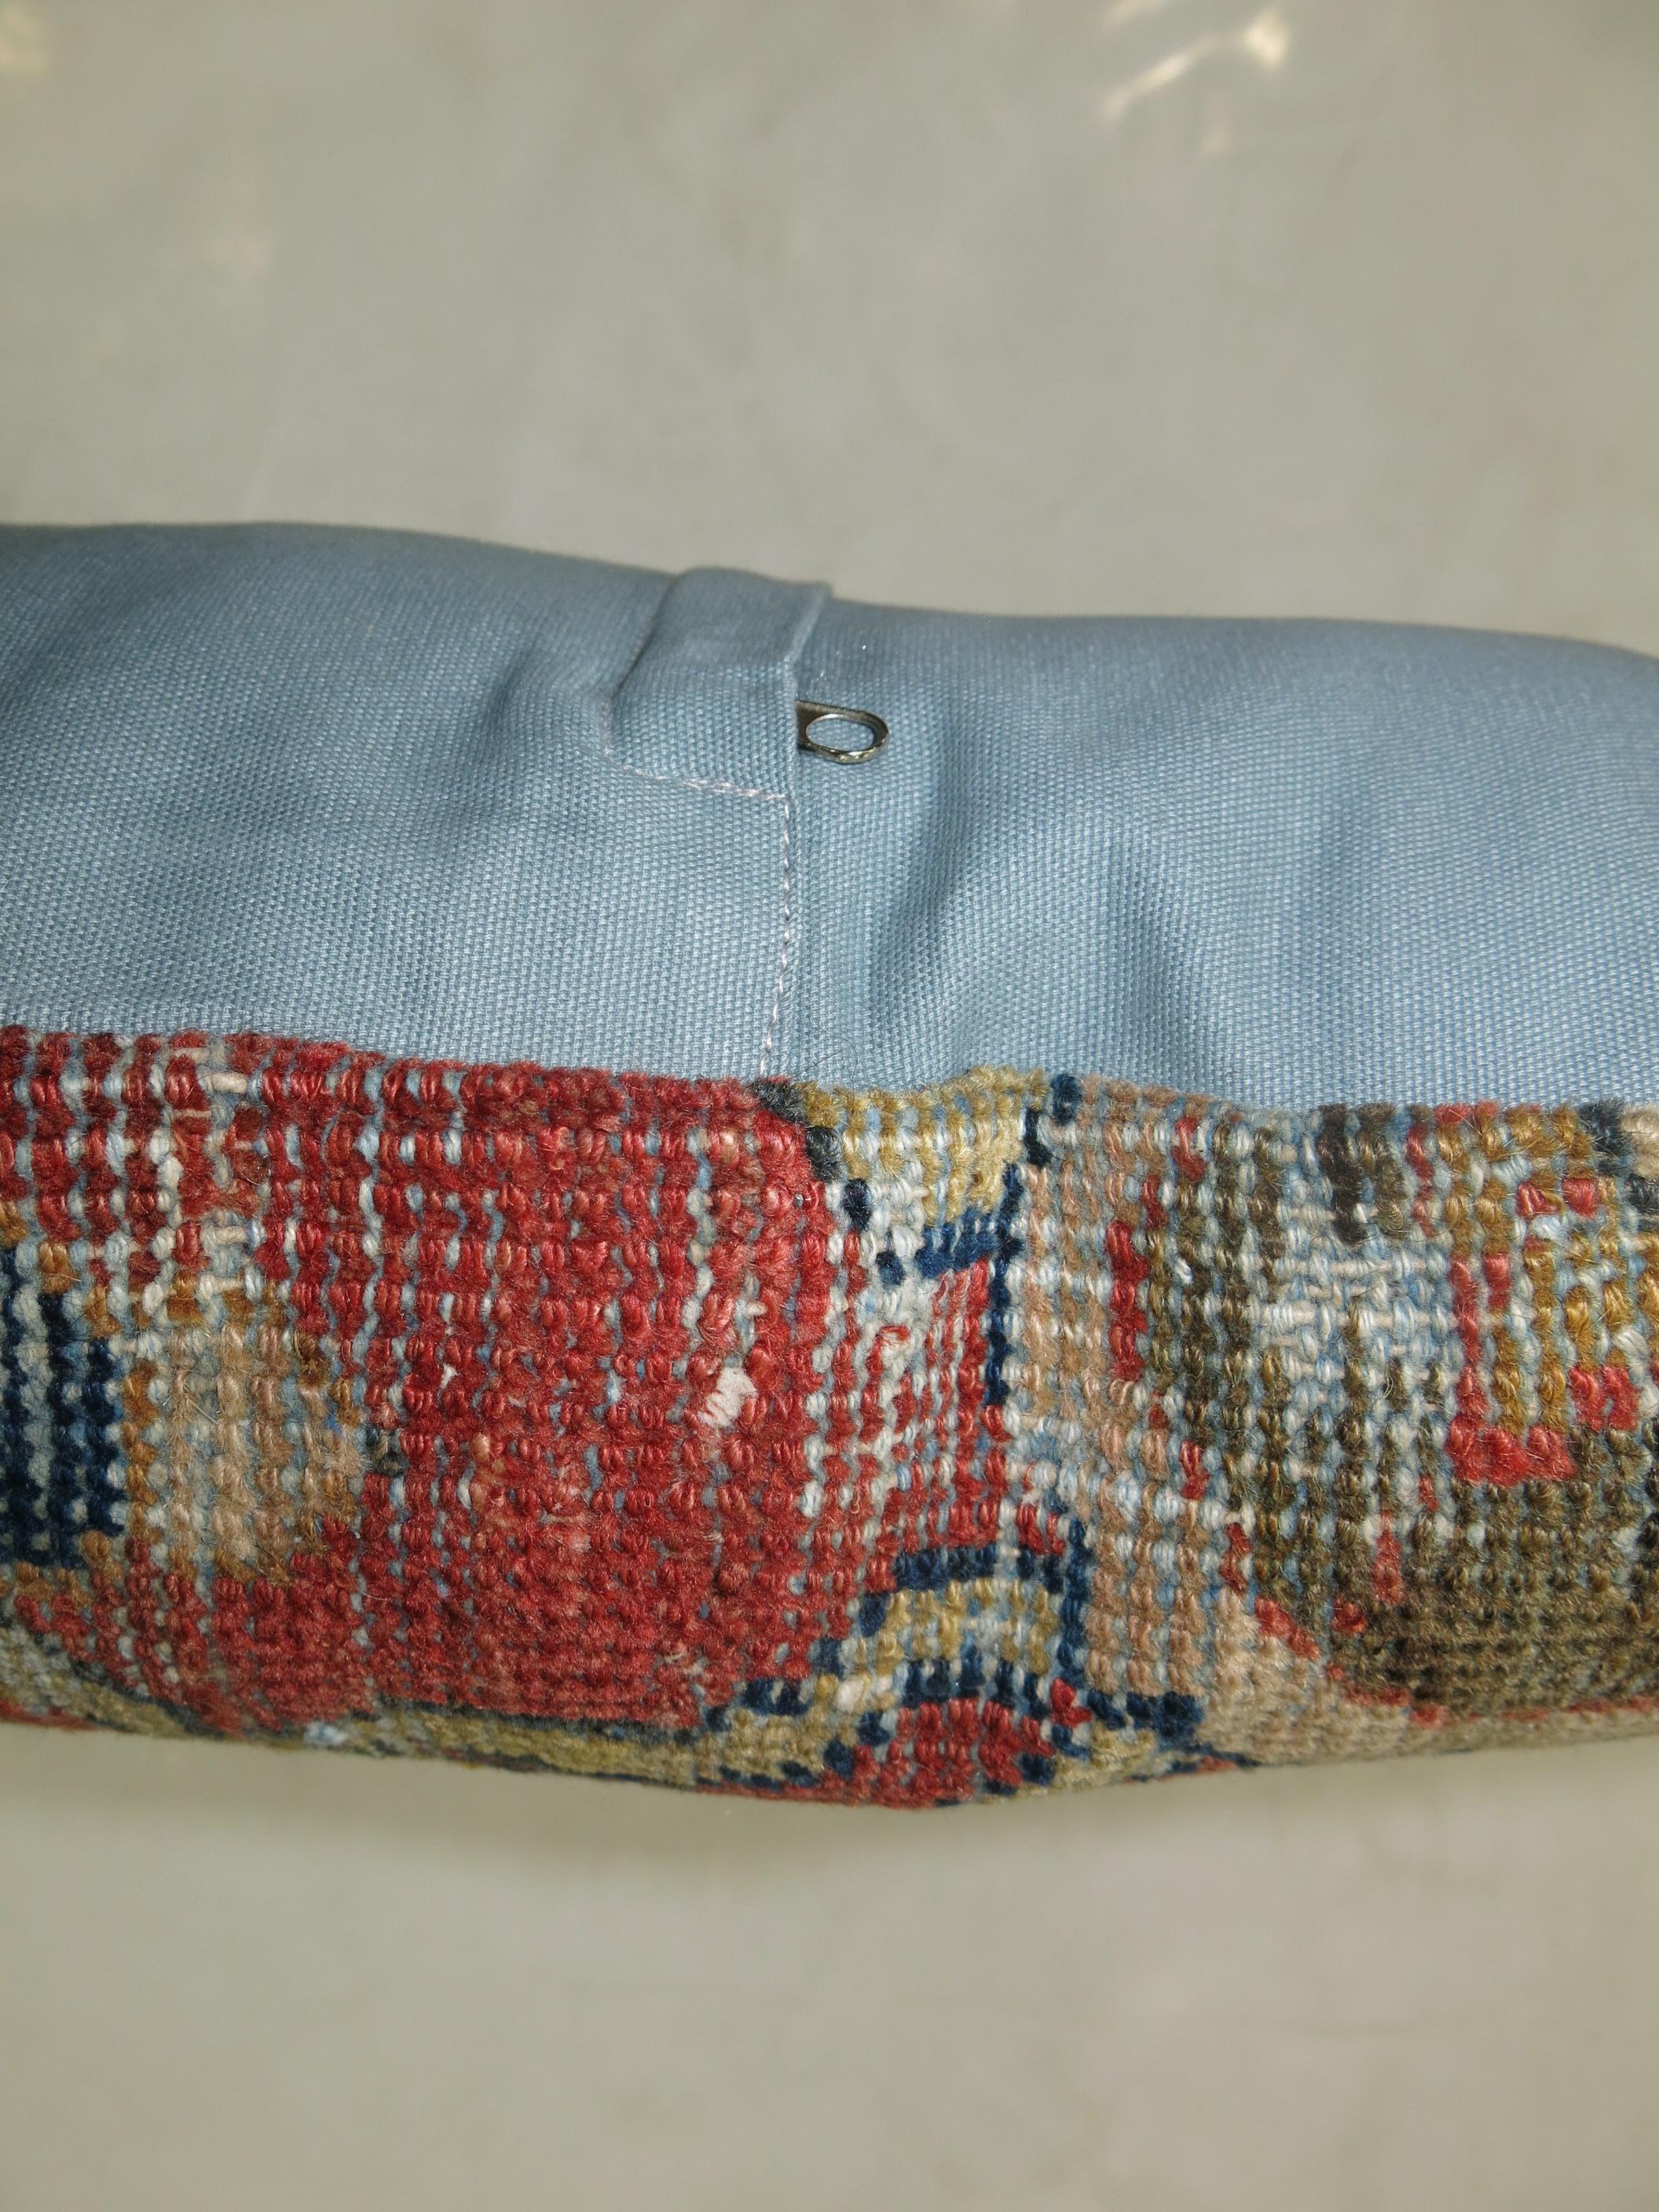 Pillow made from antique Persian rug with cotton back. Zipper closure and foam insert provided. Measures: 20” x 20”.